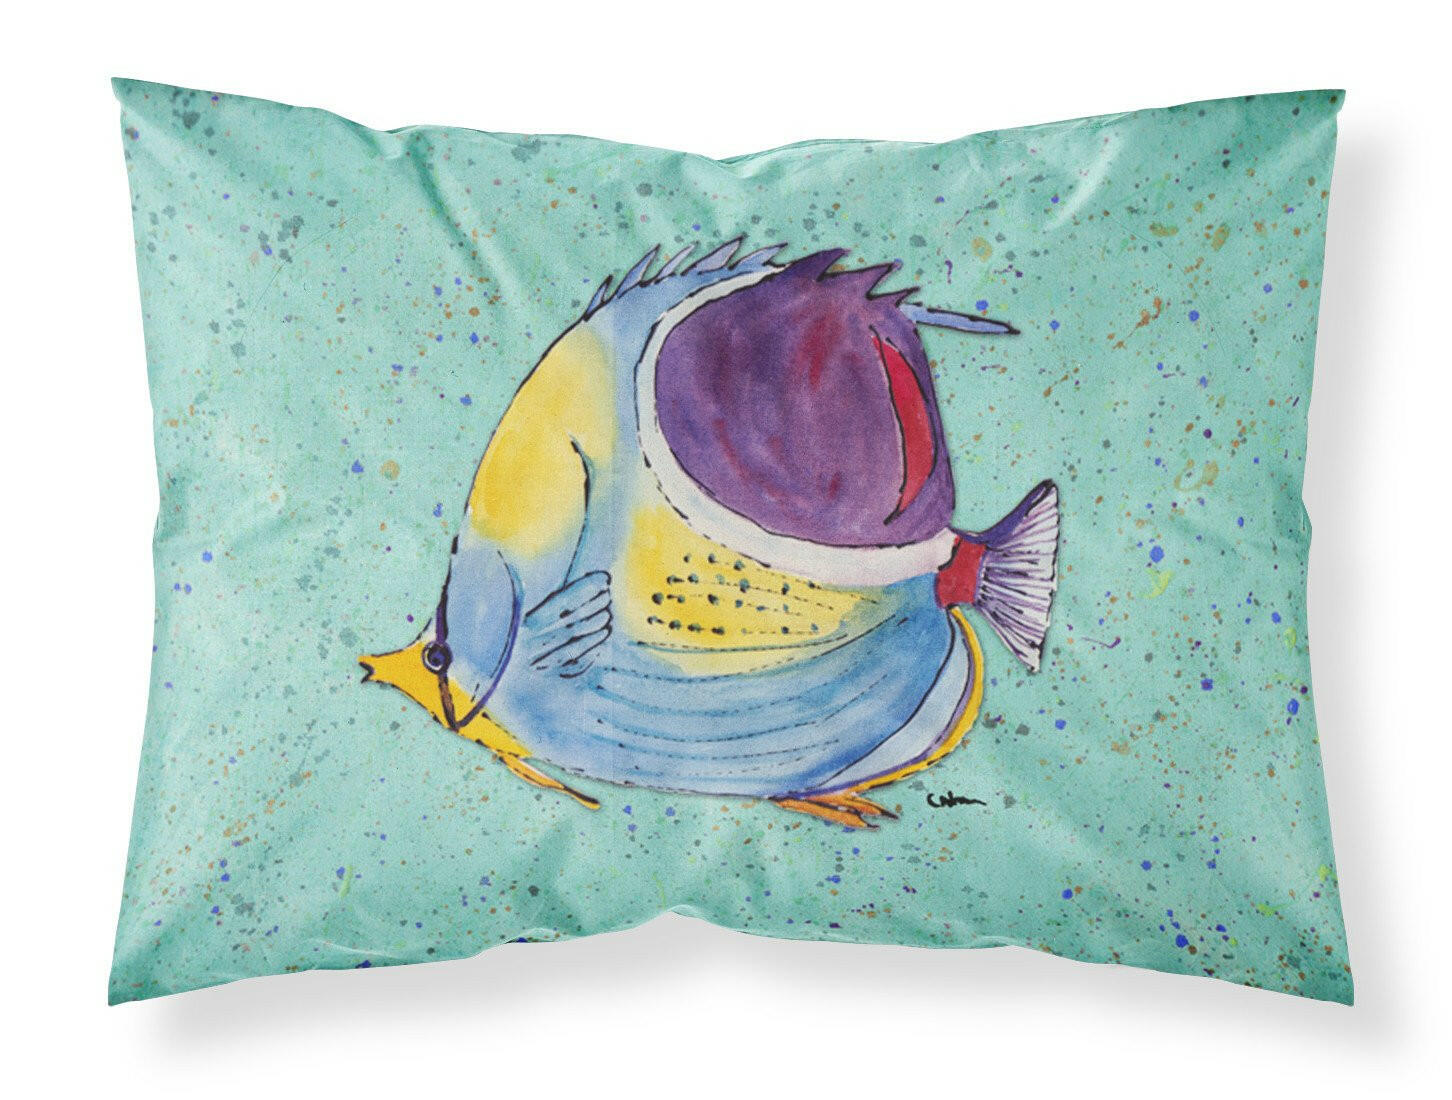 Tropical Fish on Teal Moisture wicking Fabric standard pillowcase by Caroline's Treasures